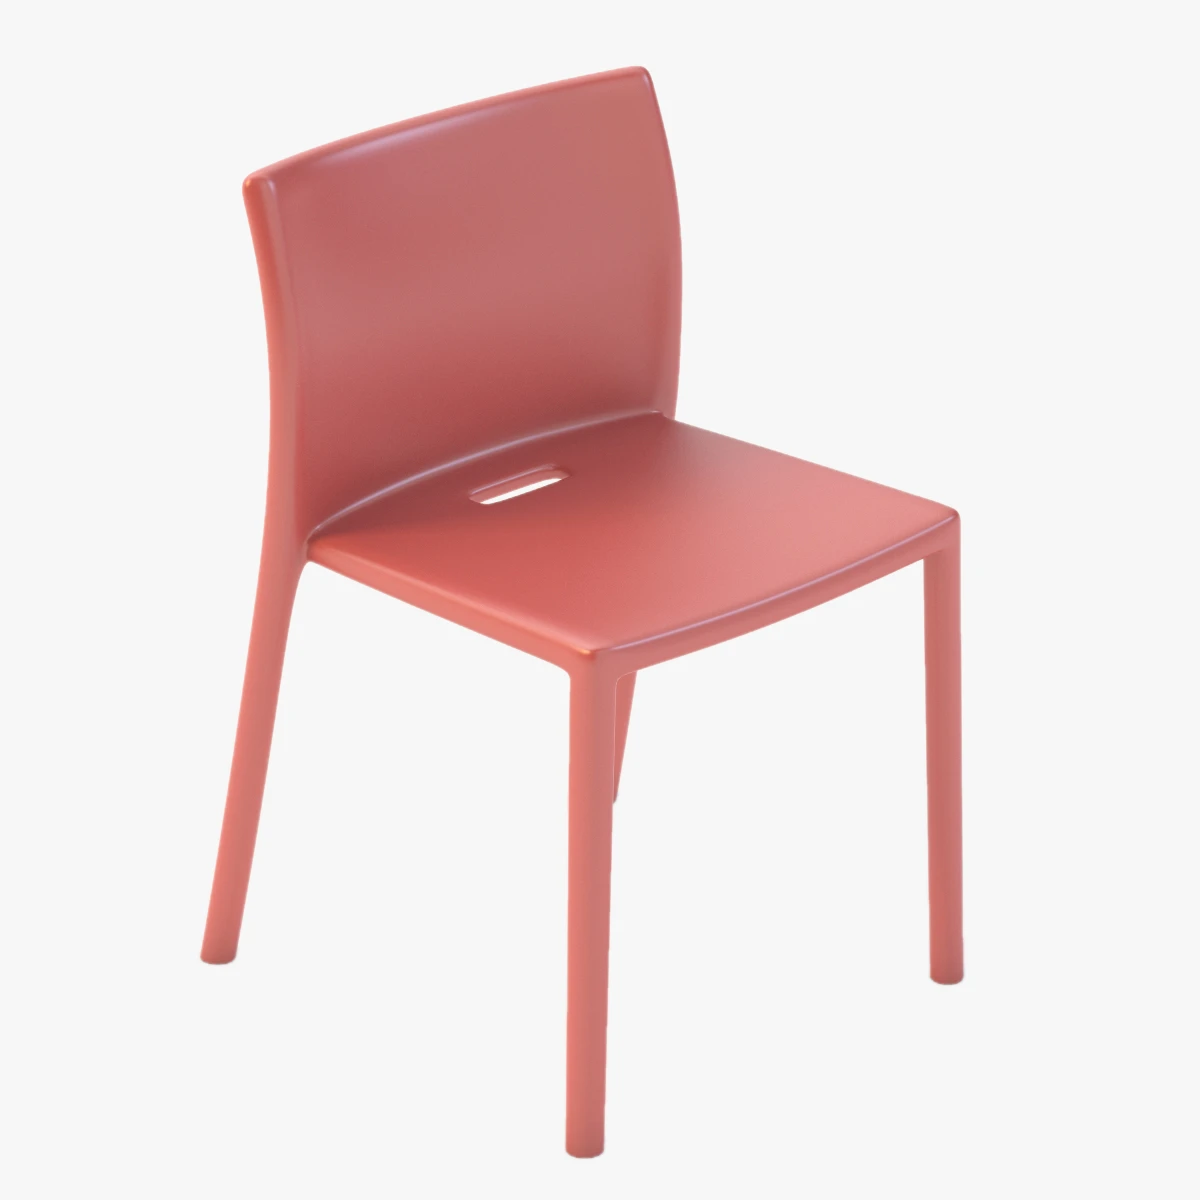 Magis Chair Collection 01 3D Model_03